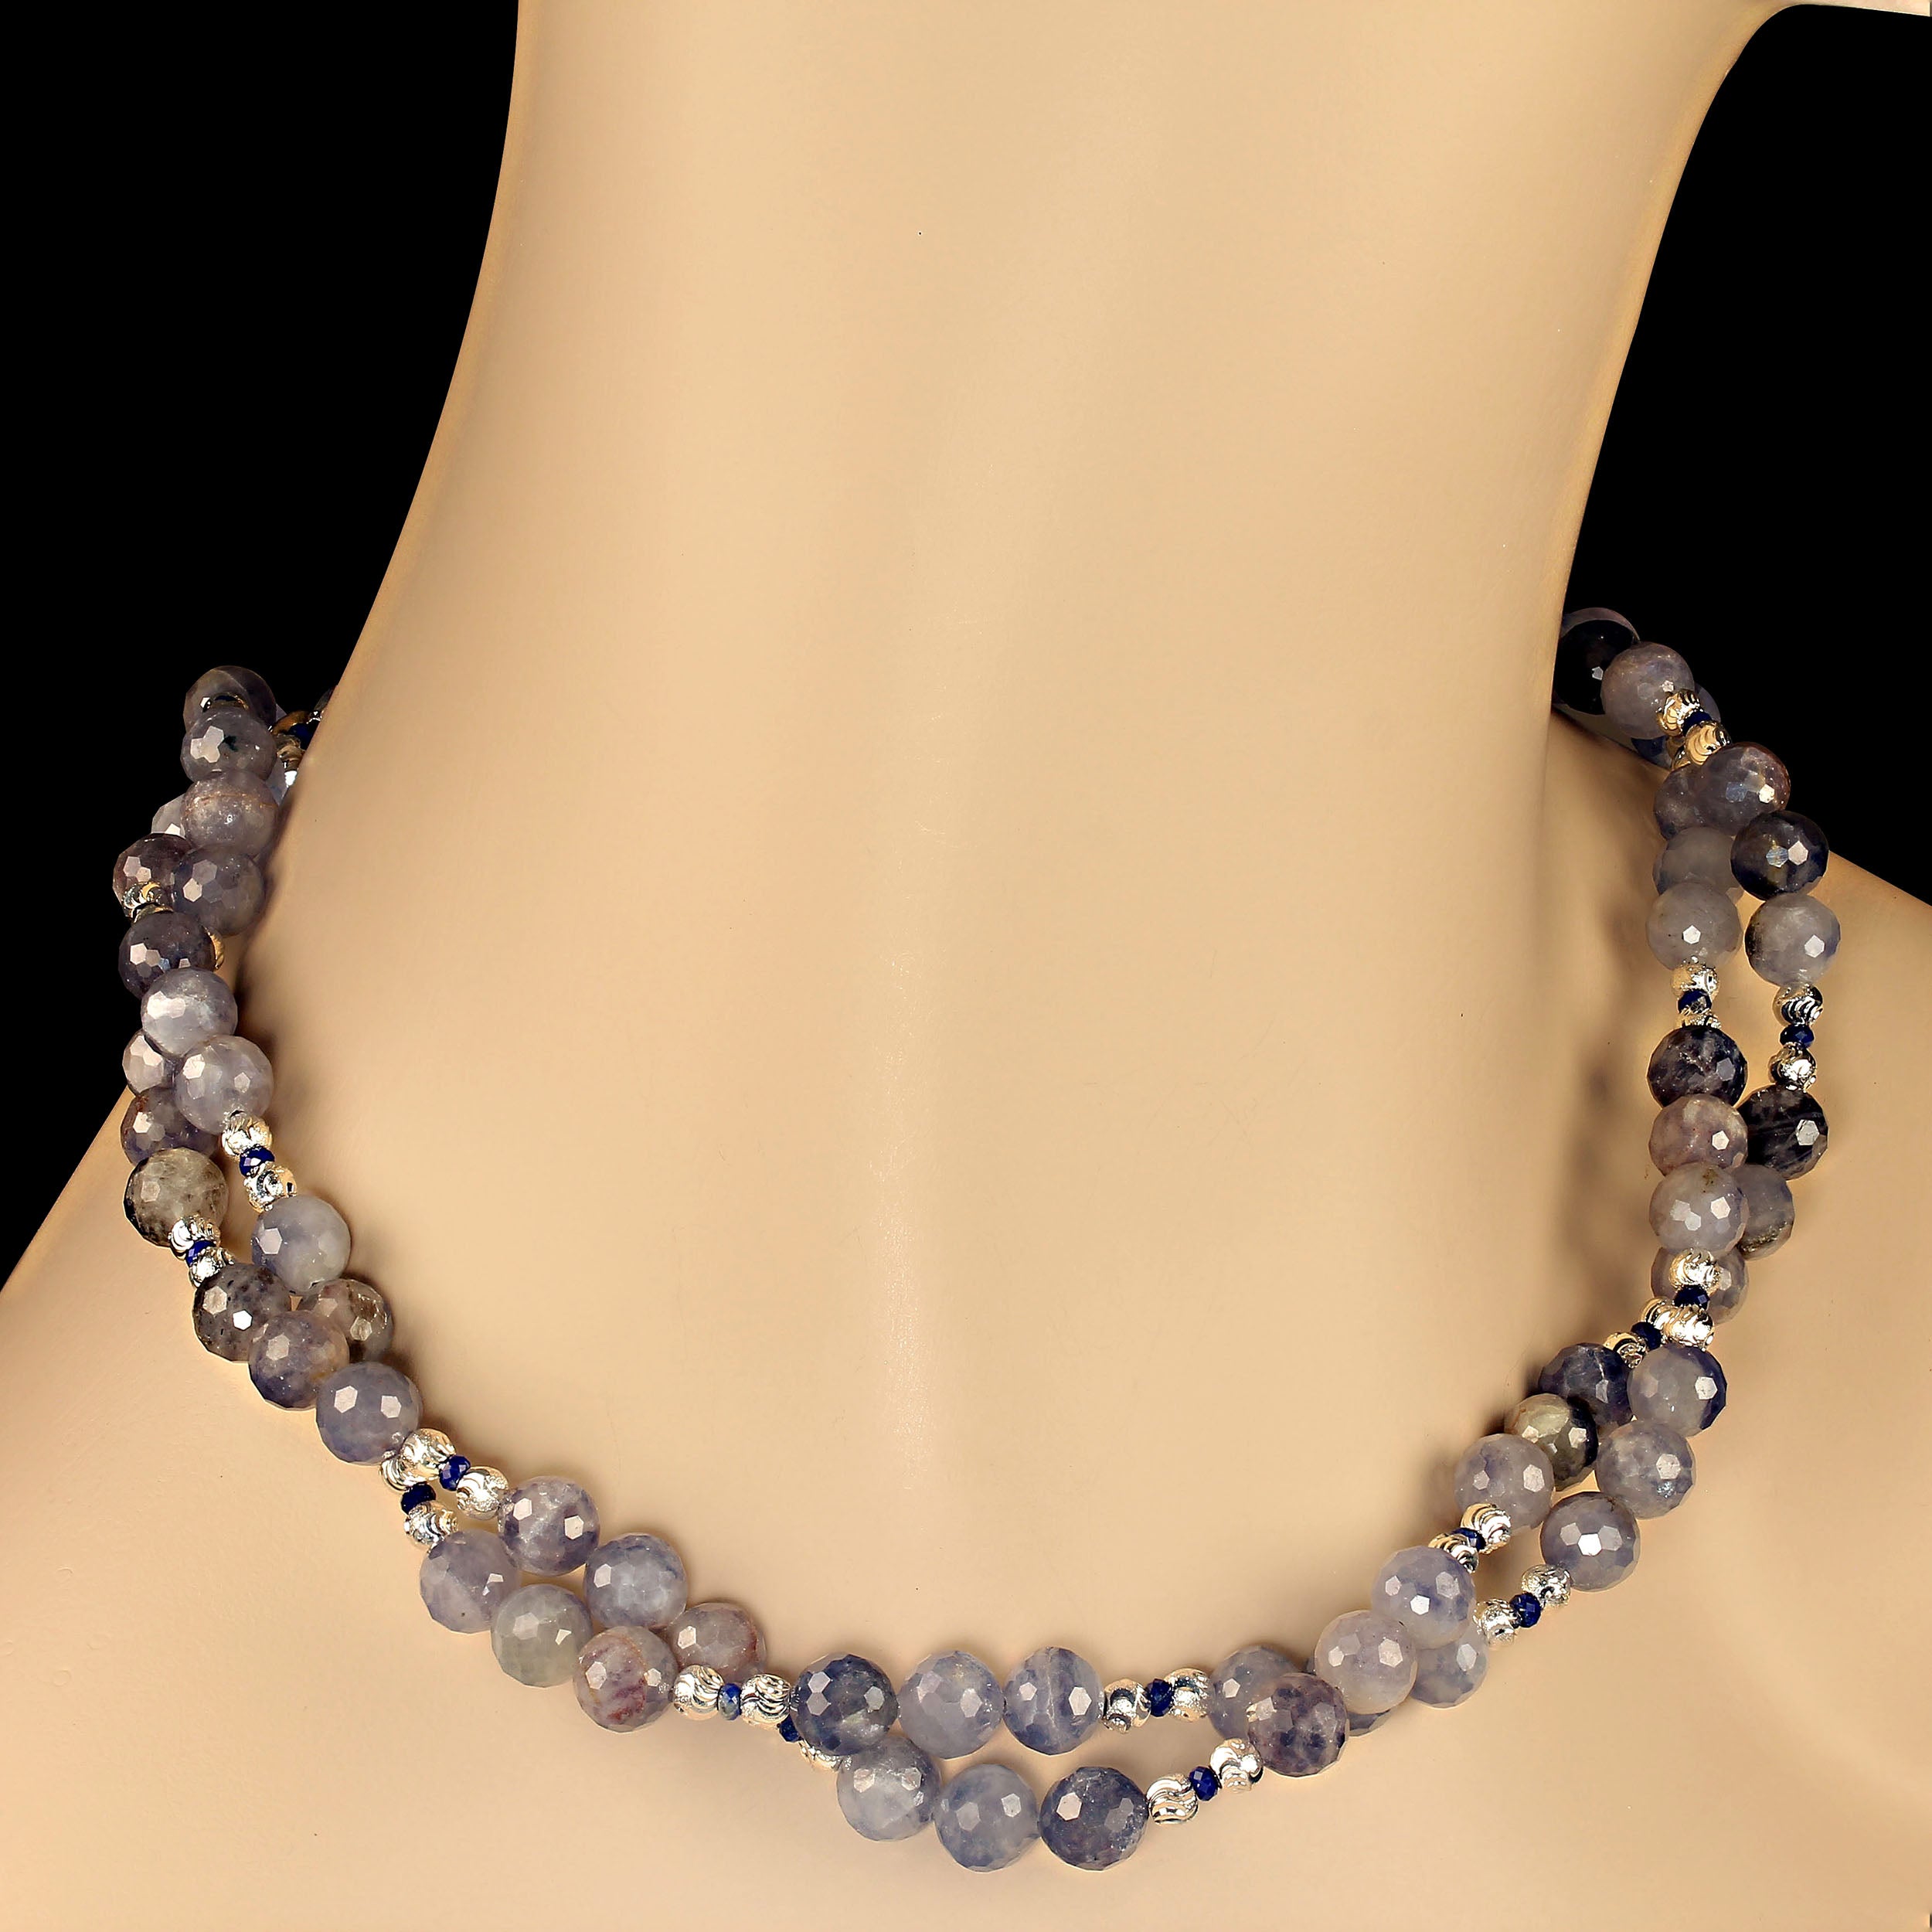 AJD 2 Strand Translucent Iolite 21 Inch necklace with Silver Accents  Great Gift